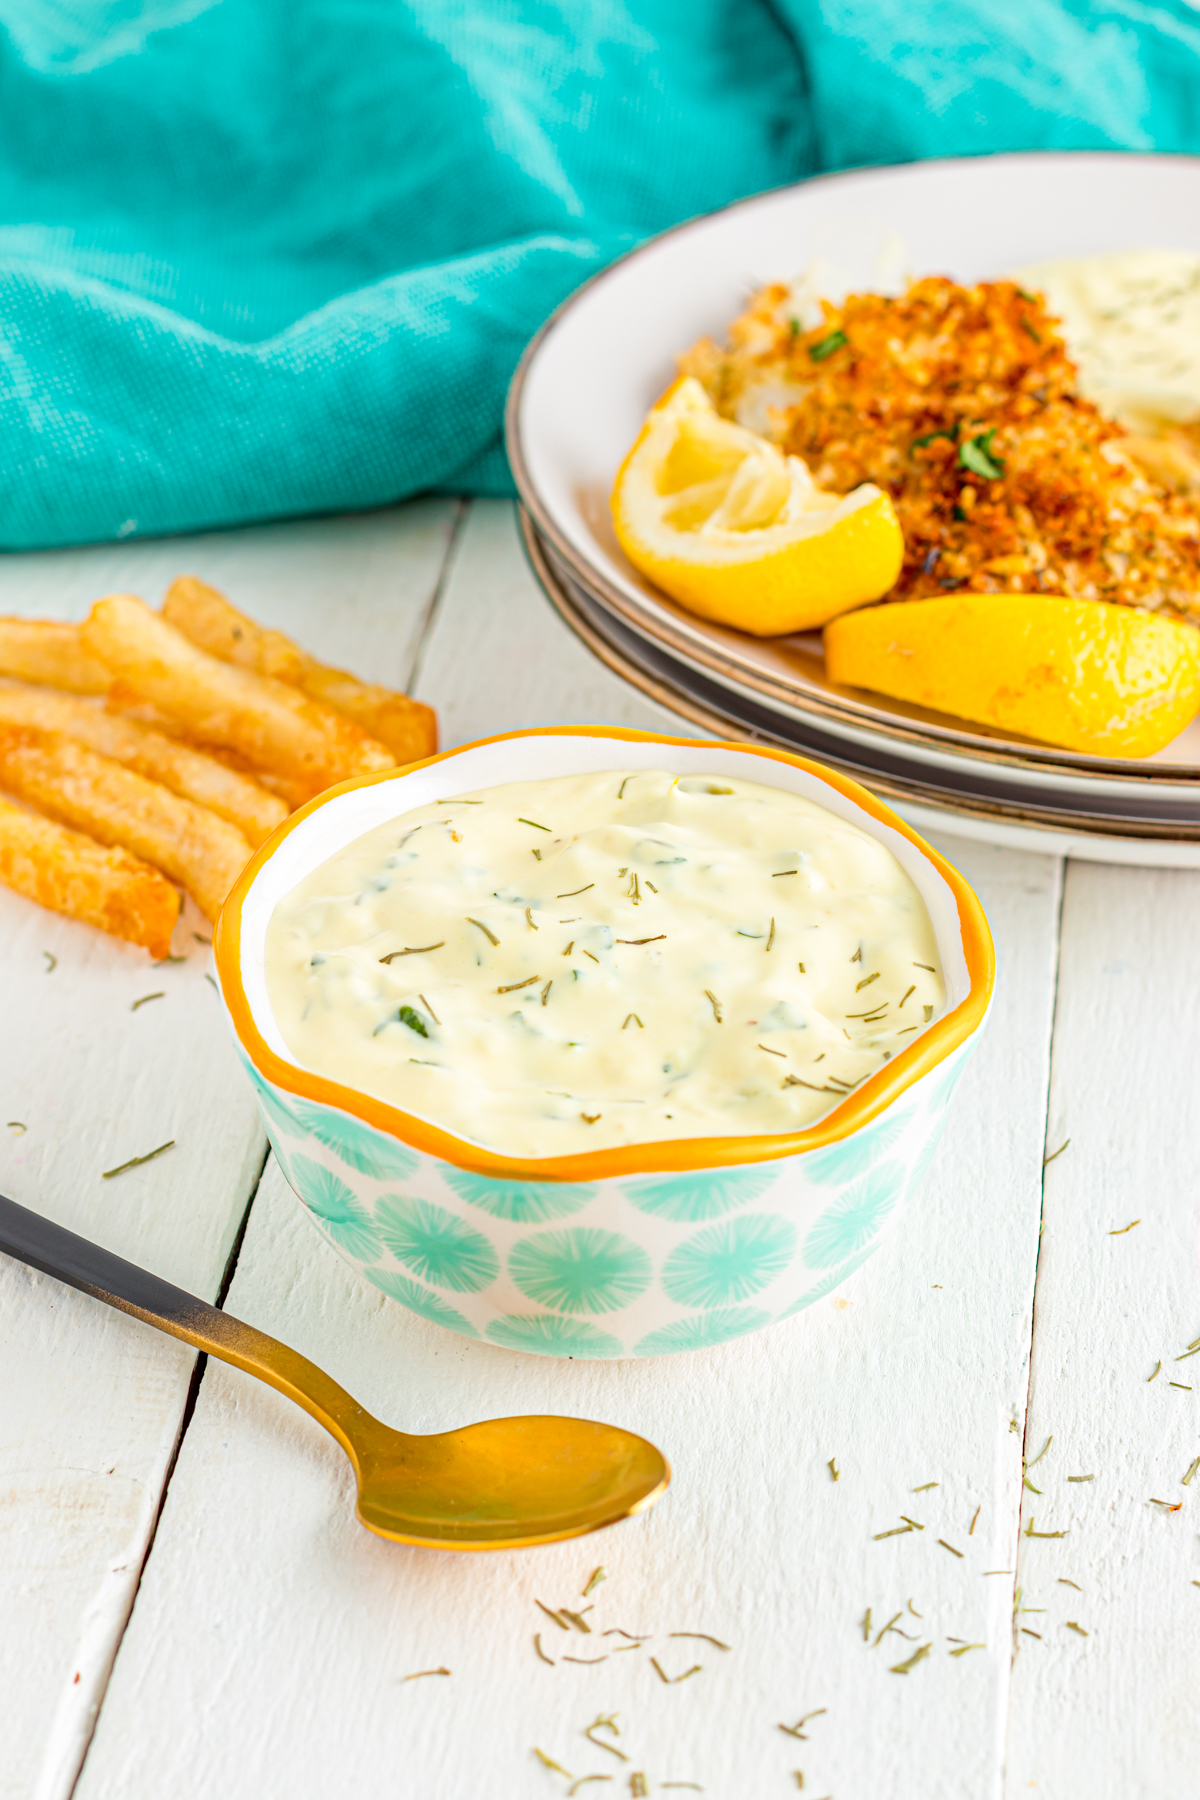 4 ingredient Tartar sauce on a table with fish and chips.